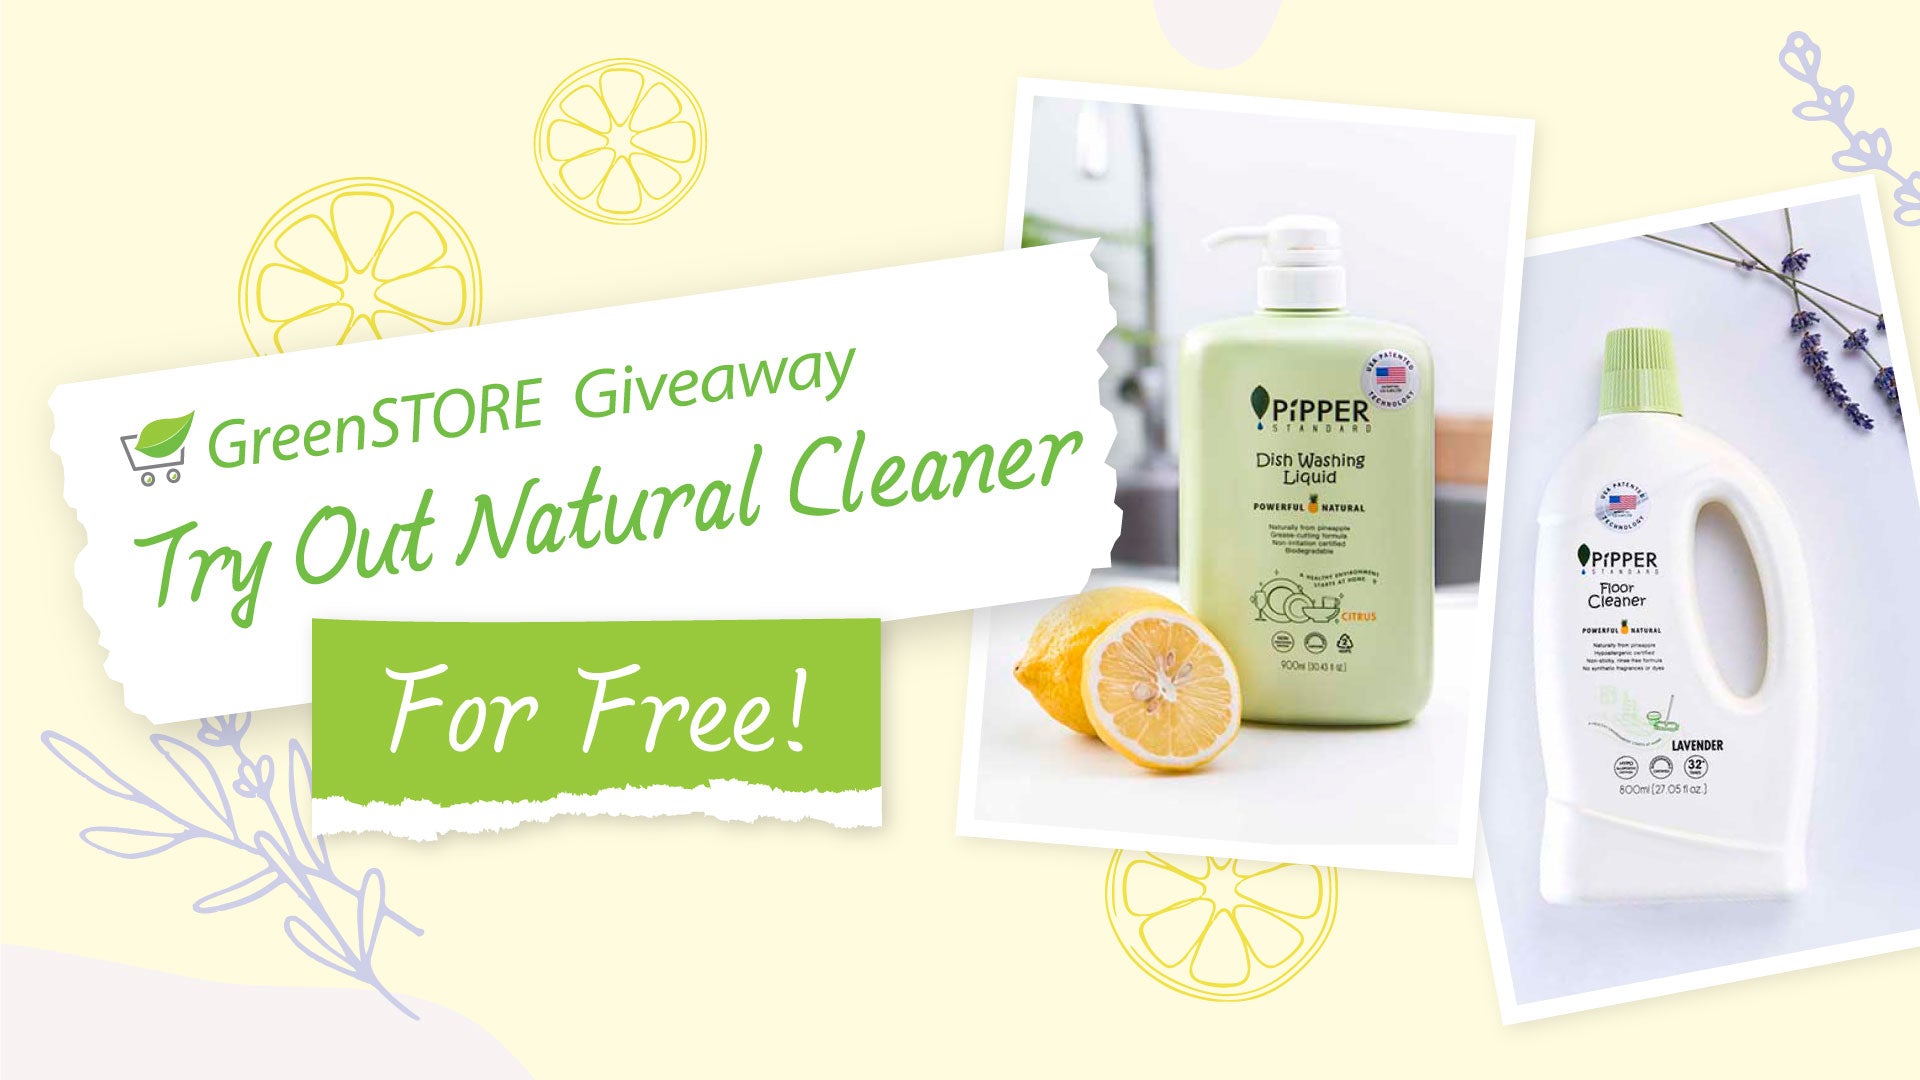 【GreenSTORE Giveaway】Try Out Natural Cleaner For Free!